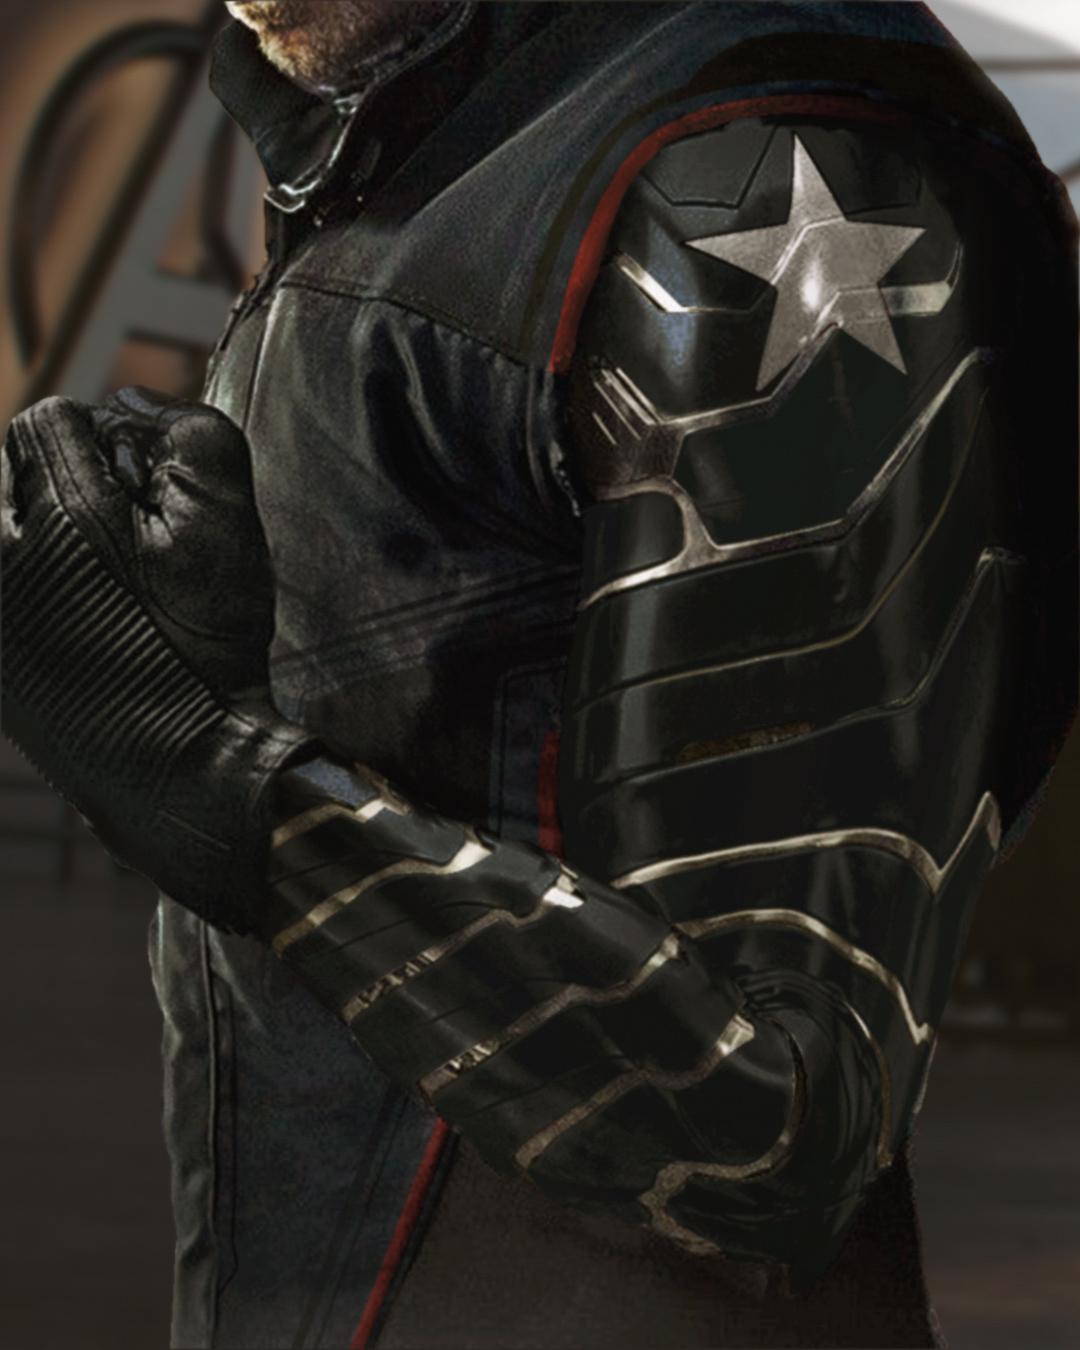 Falcon and Winter Soldier Merchandise Offers a Great Look at Their New Suits